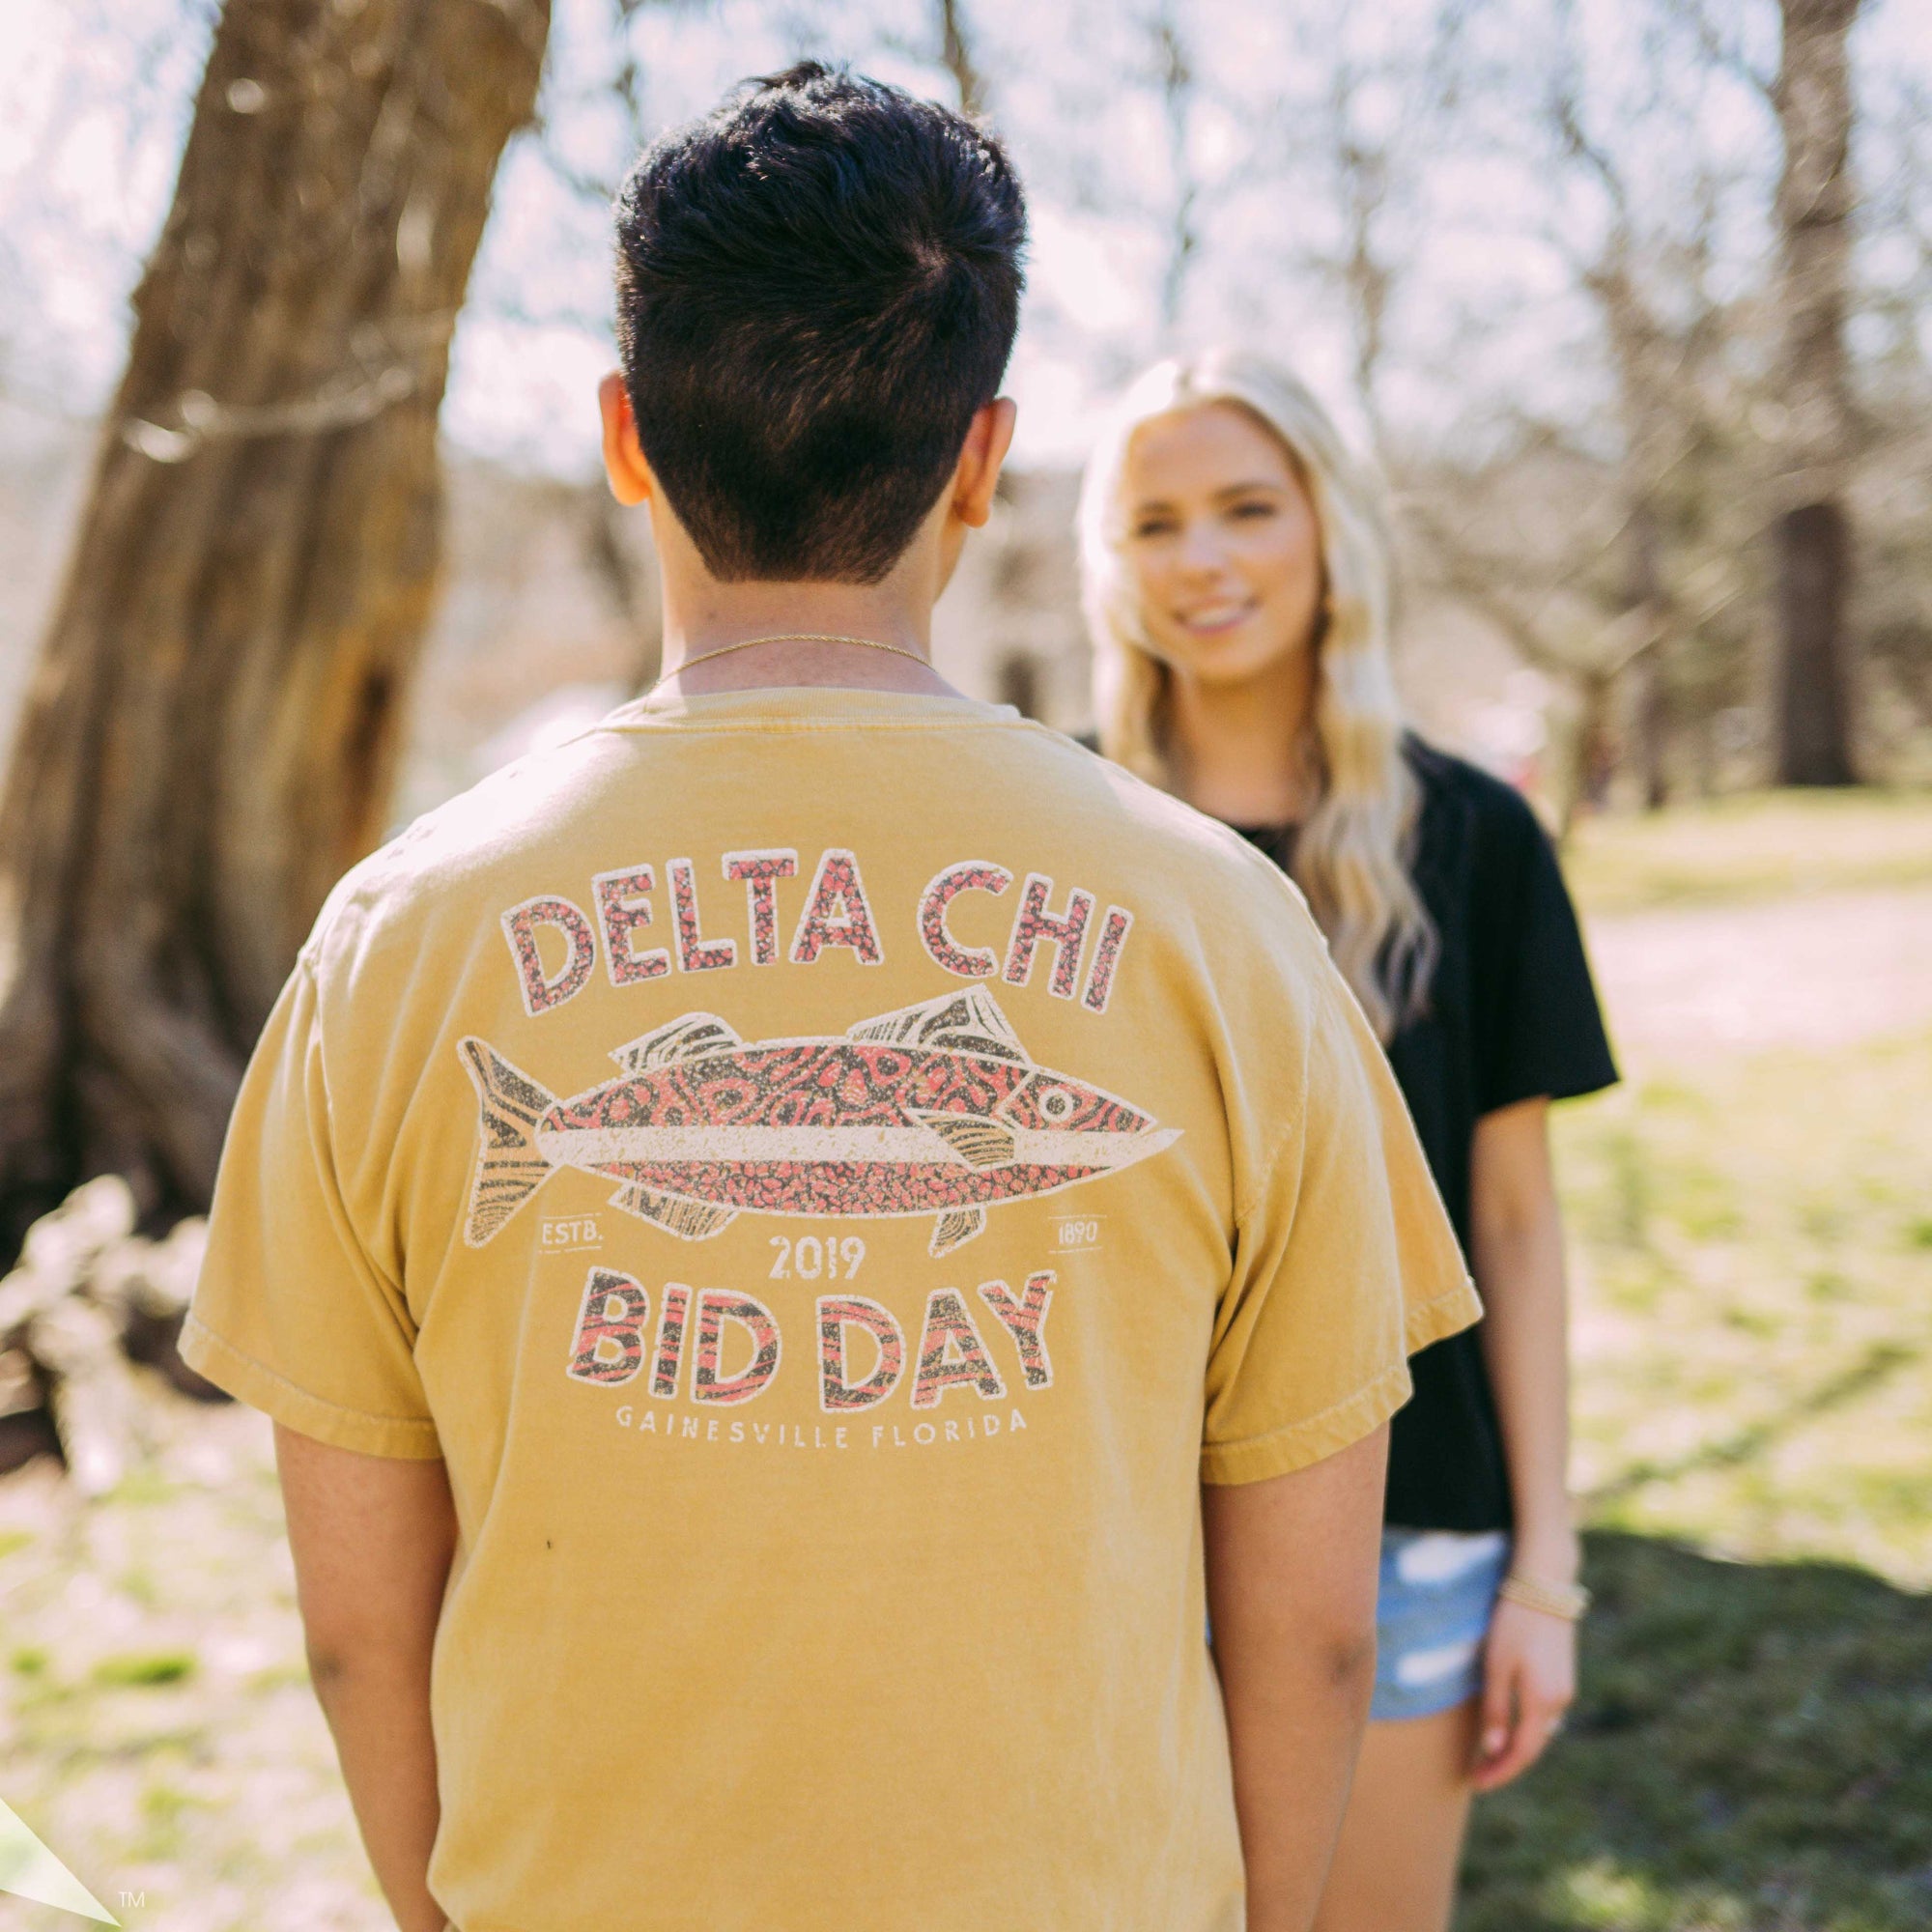 Boy with back facing the camera wearing a yellow Delta Chi tshirt with a picture of a fish on it.